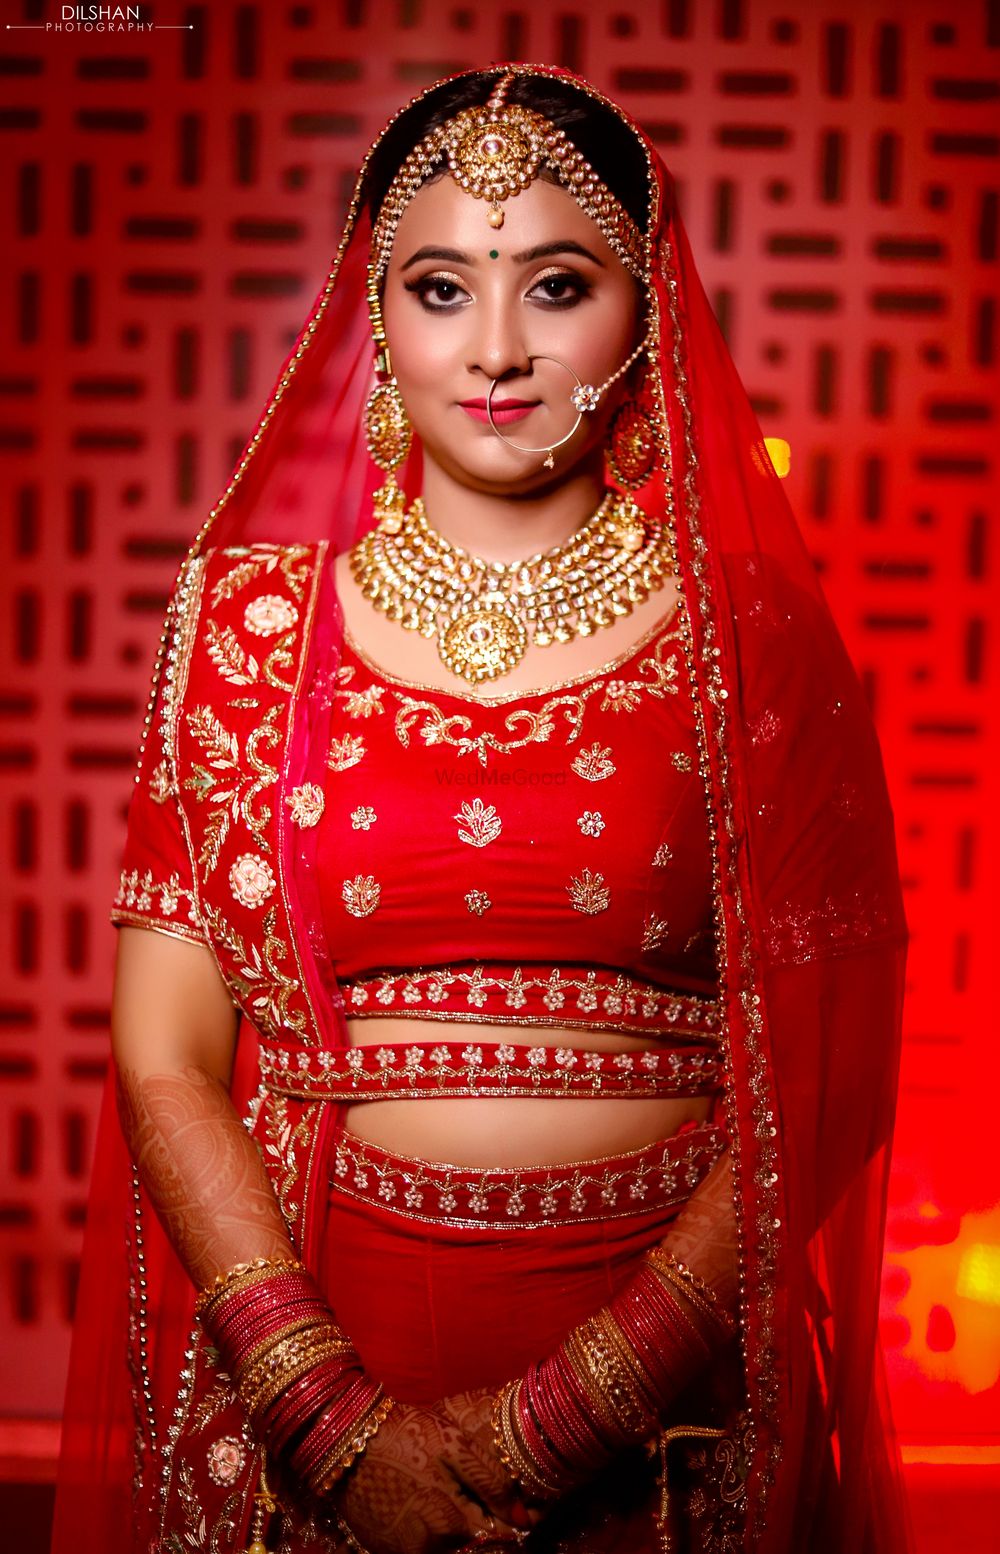 Photo From Saloni + Amar - By Dilshan Photography